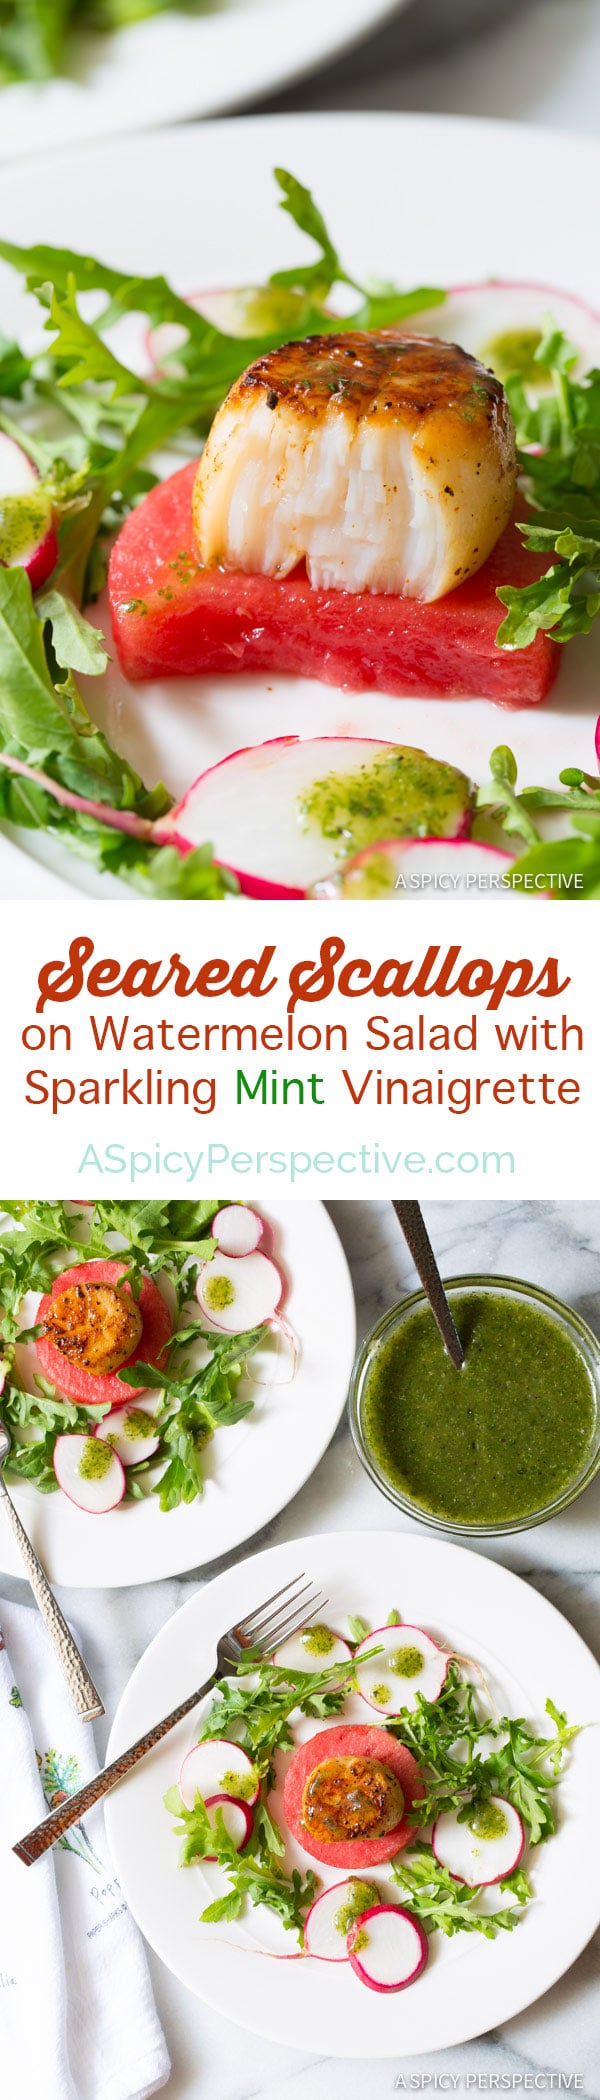 Lovely Seared Scallops on Watermelon Salad with Sparkling Mint Vinaigrette - ASpicyPerspective.com 